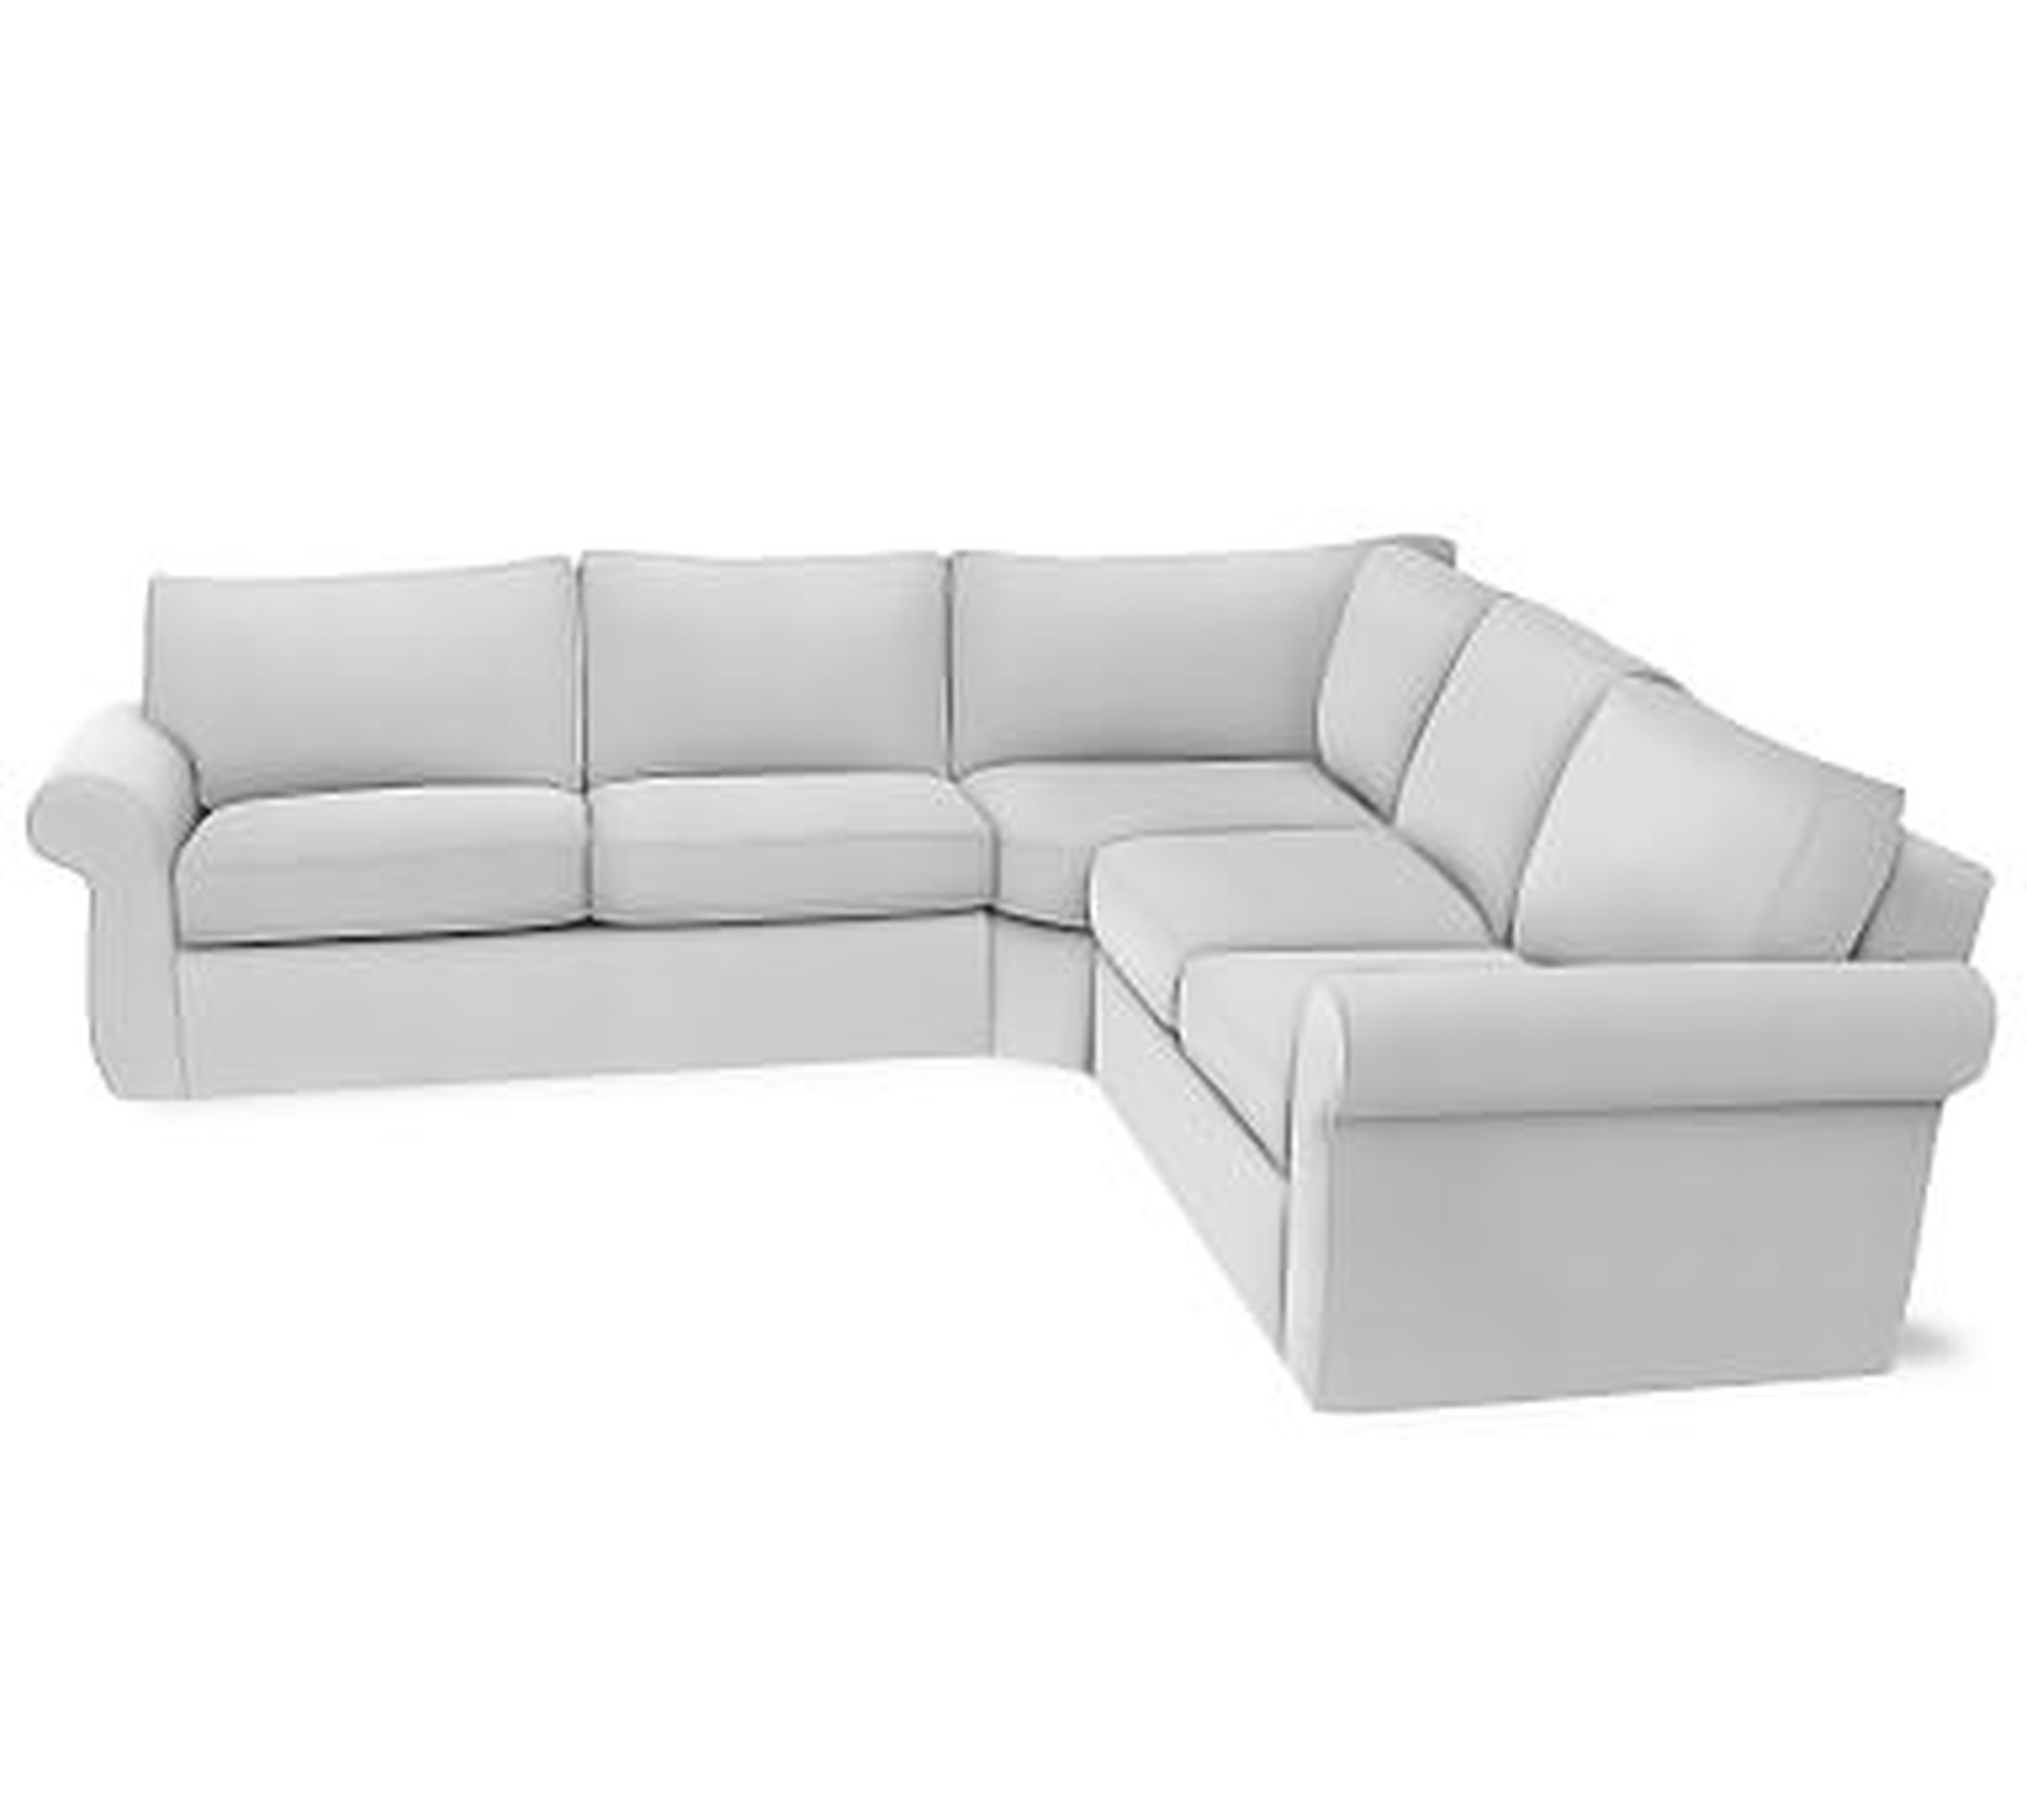 Pearce Roll Arm Slipcovered 3-Piece L-Shaped Wedge Sectional, Down Blend Wrapped Cushions, Performance Twill Warm White - Pottery Barn